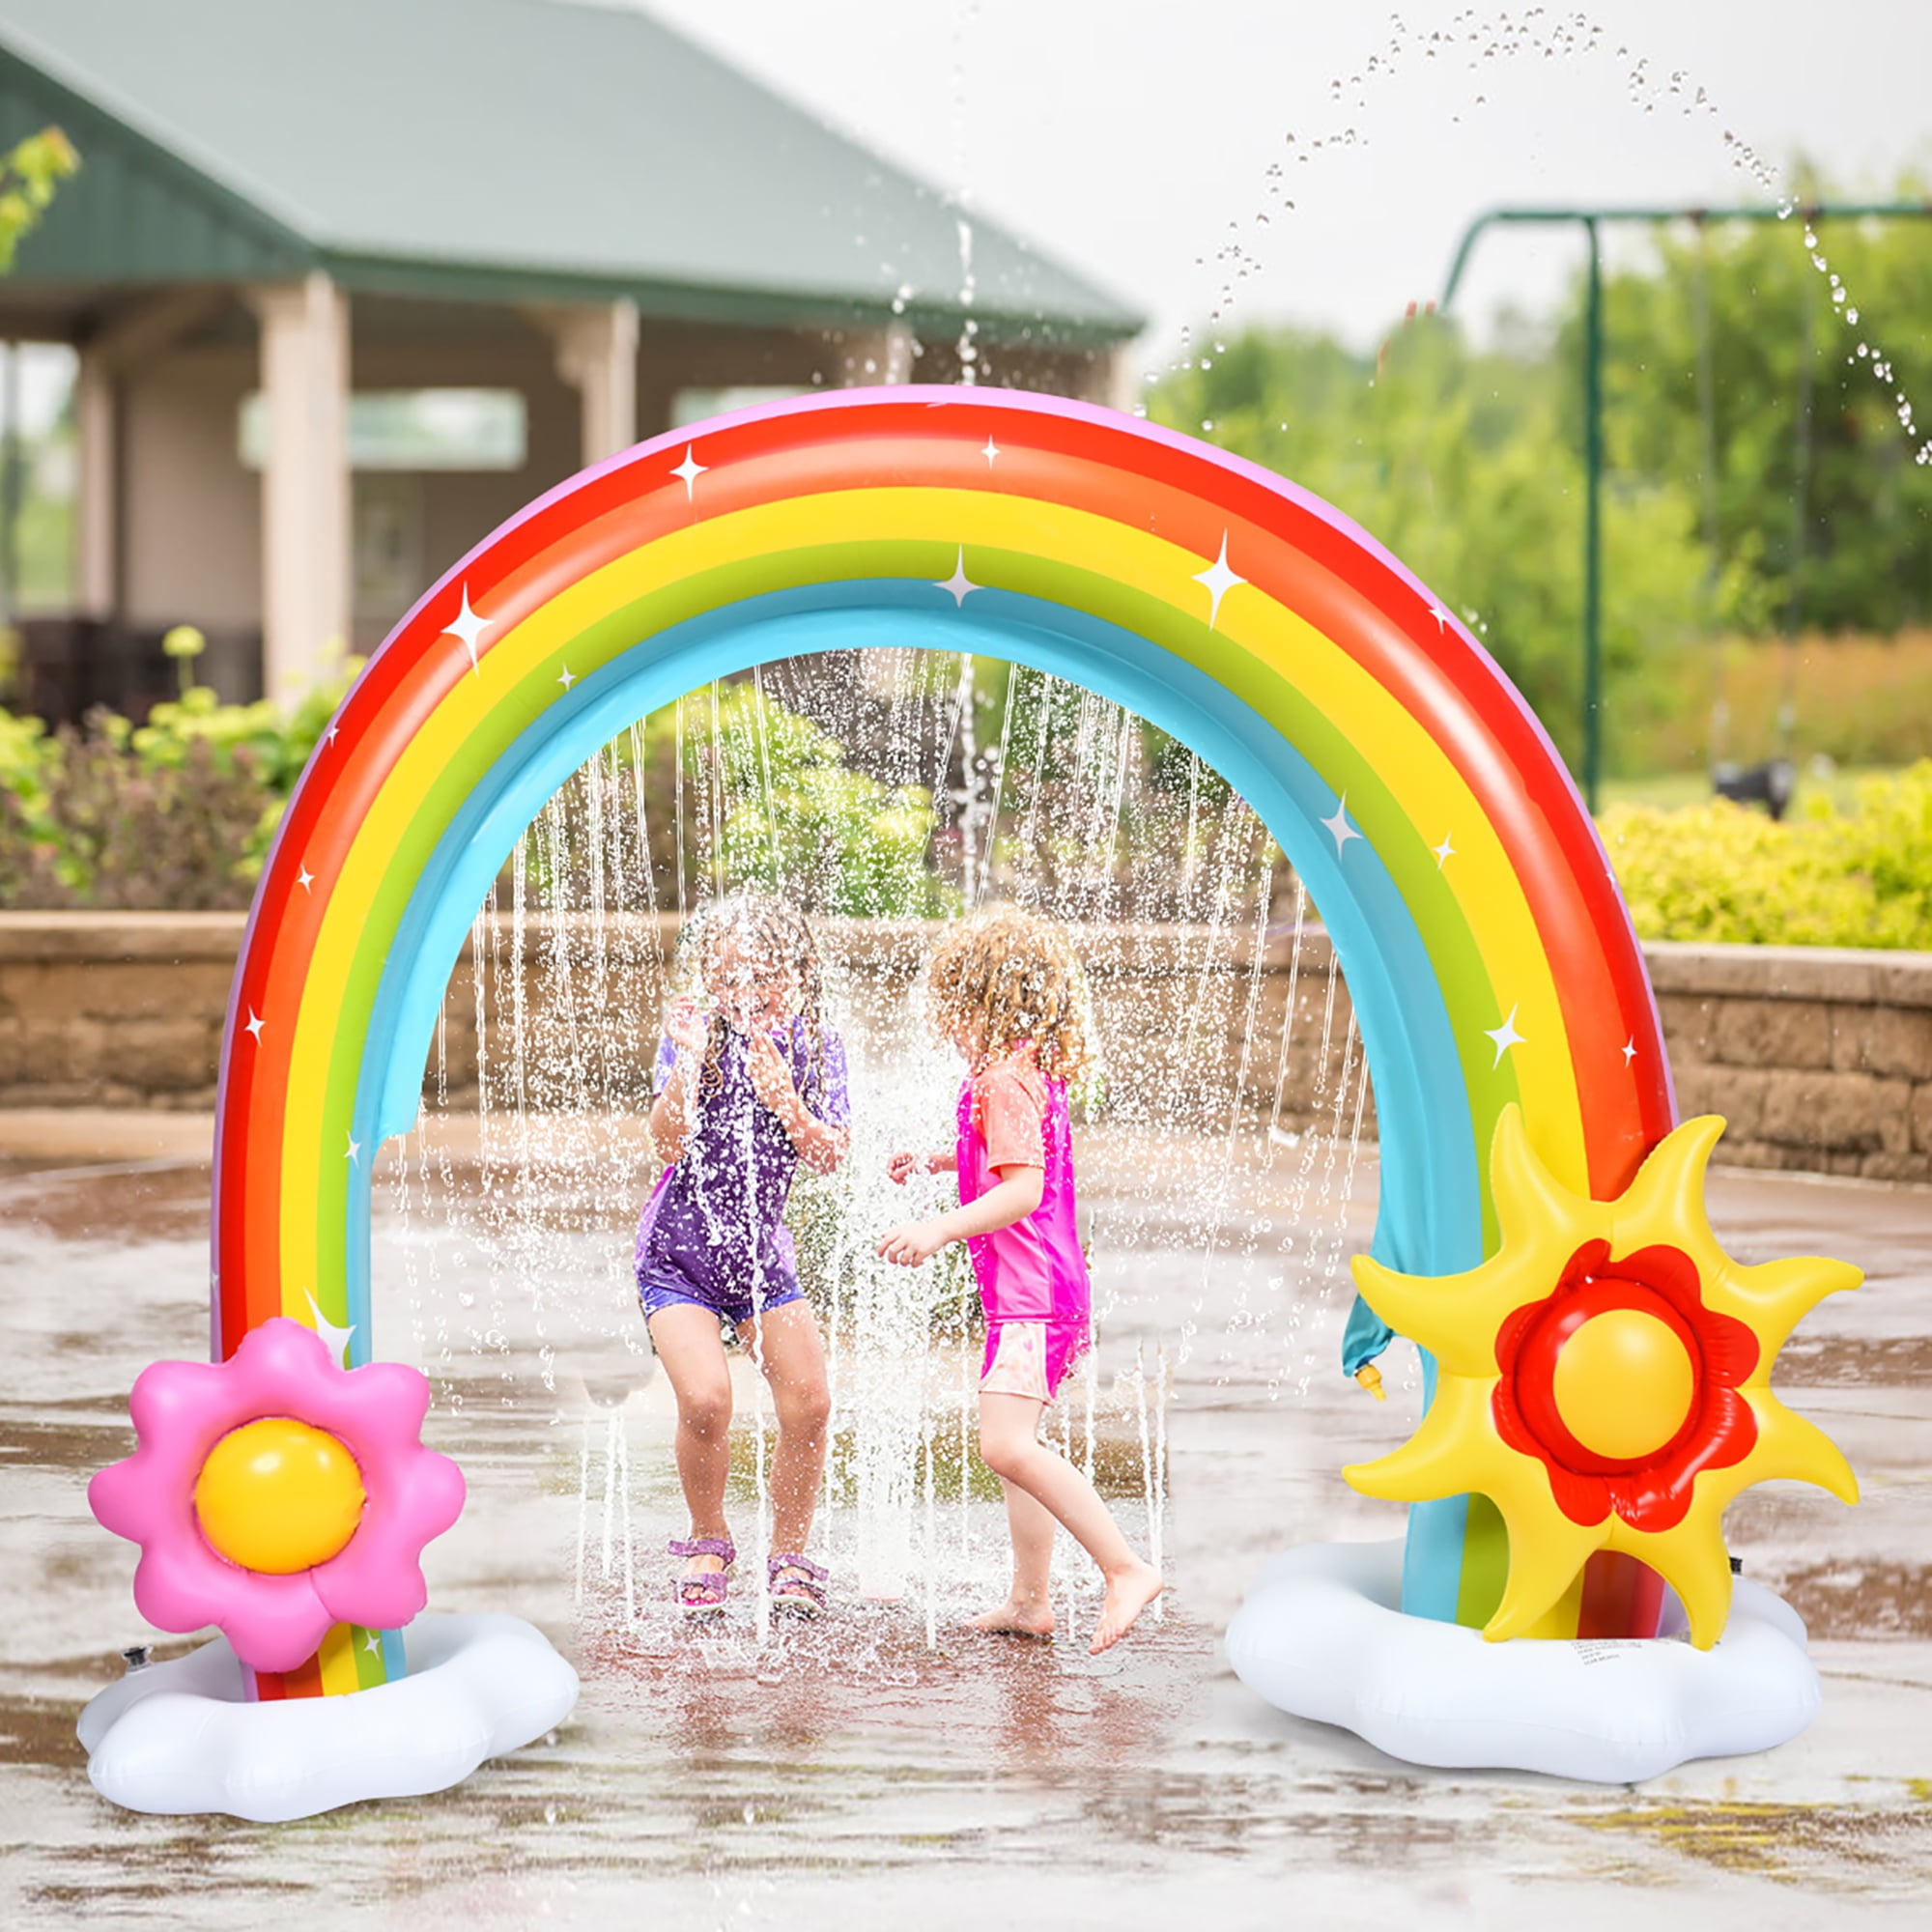 Inflatable Water Spray Ball Sprinkler Toys Kids Lawn Beach Outdoor Child gift UK 